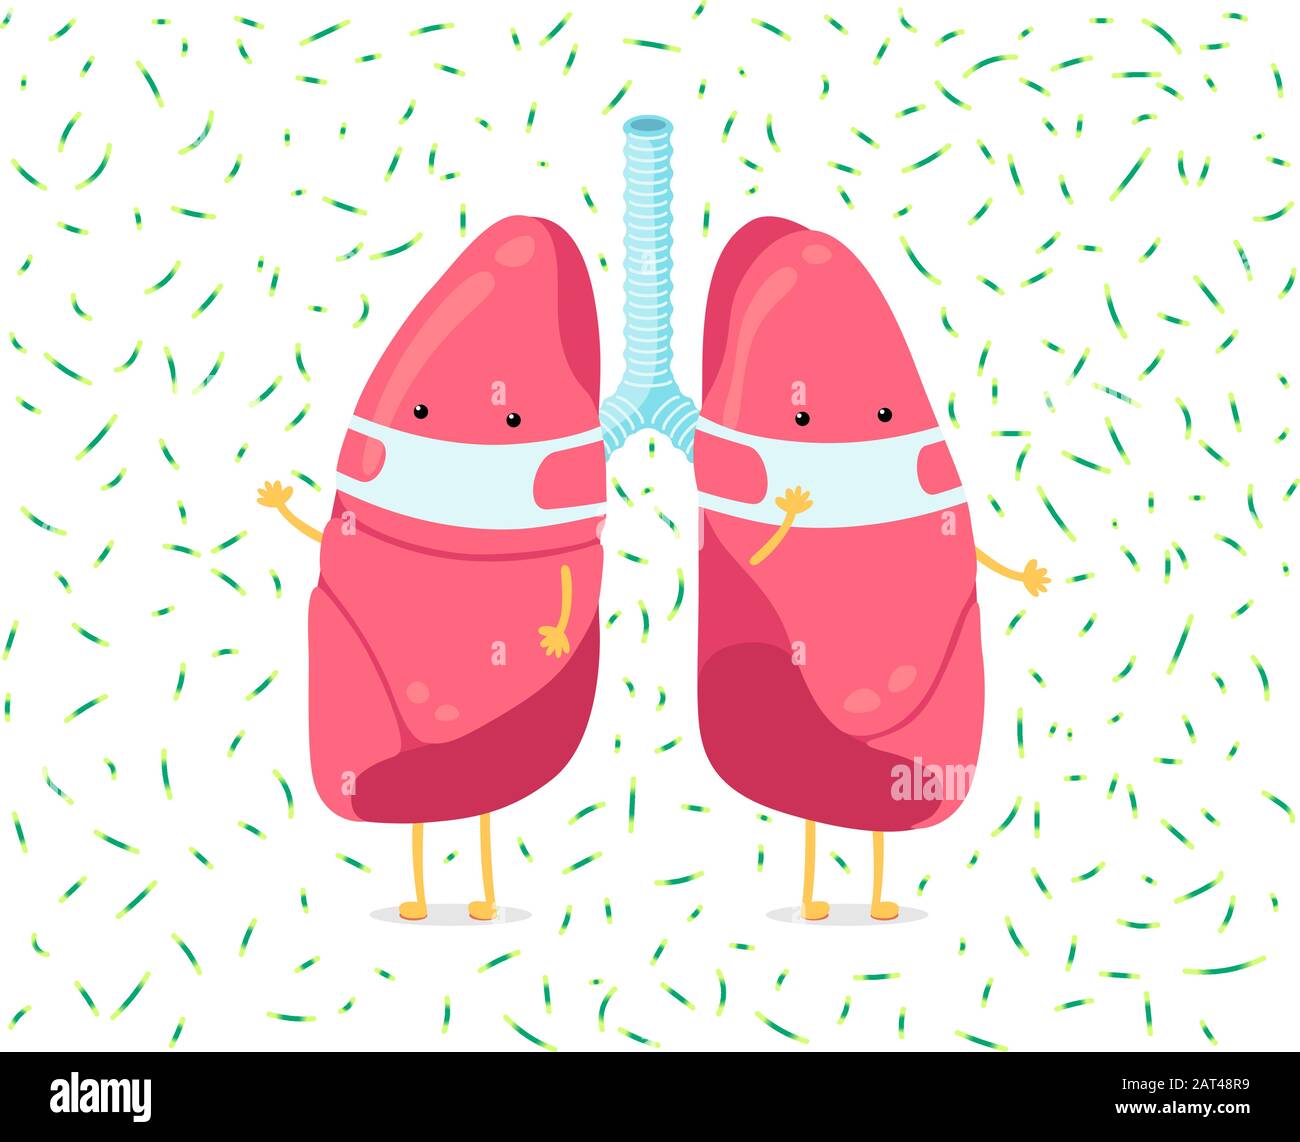 Cartoon lung character with breathing hygiene face mask and viruses infection around. Human internal organ prevents sick pneumonia tuberculosis airborne droplet. Medical protection vector illusrtation Stock Vector